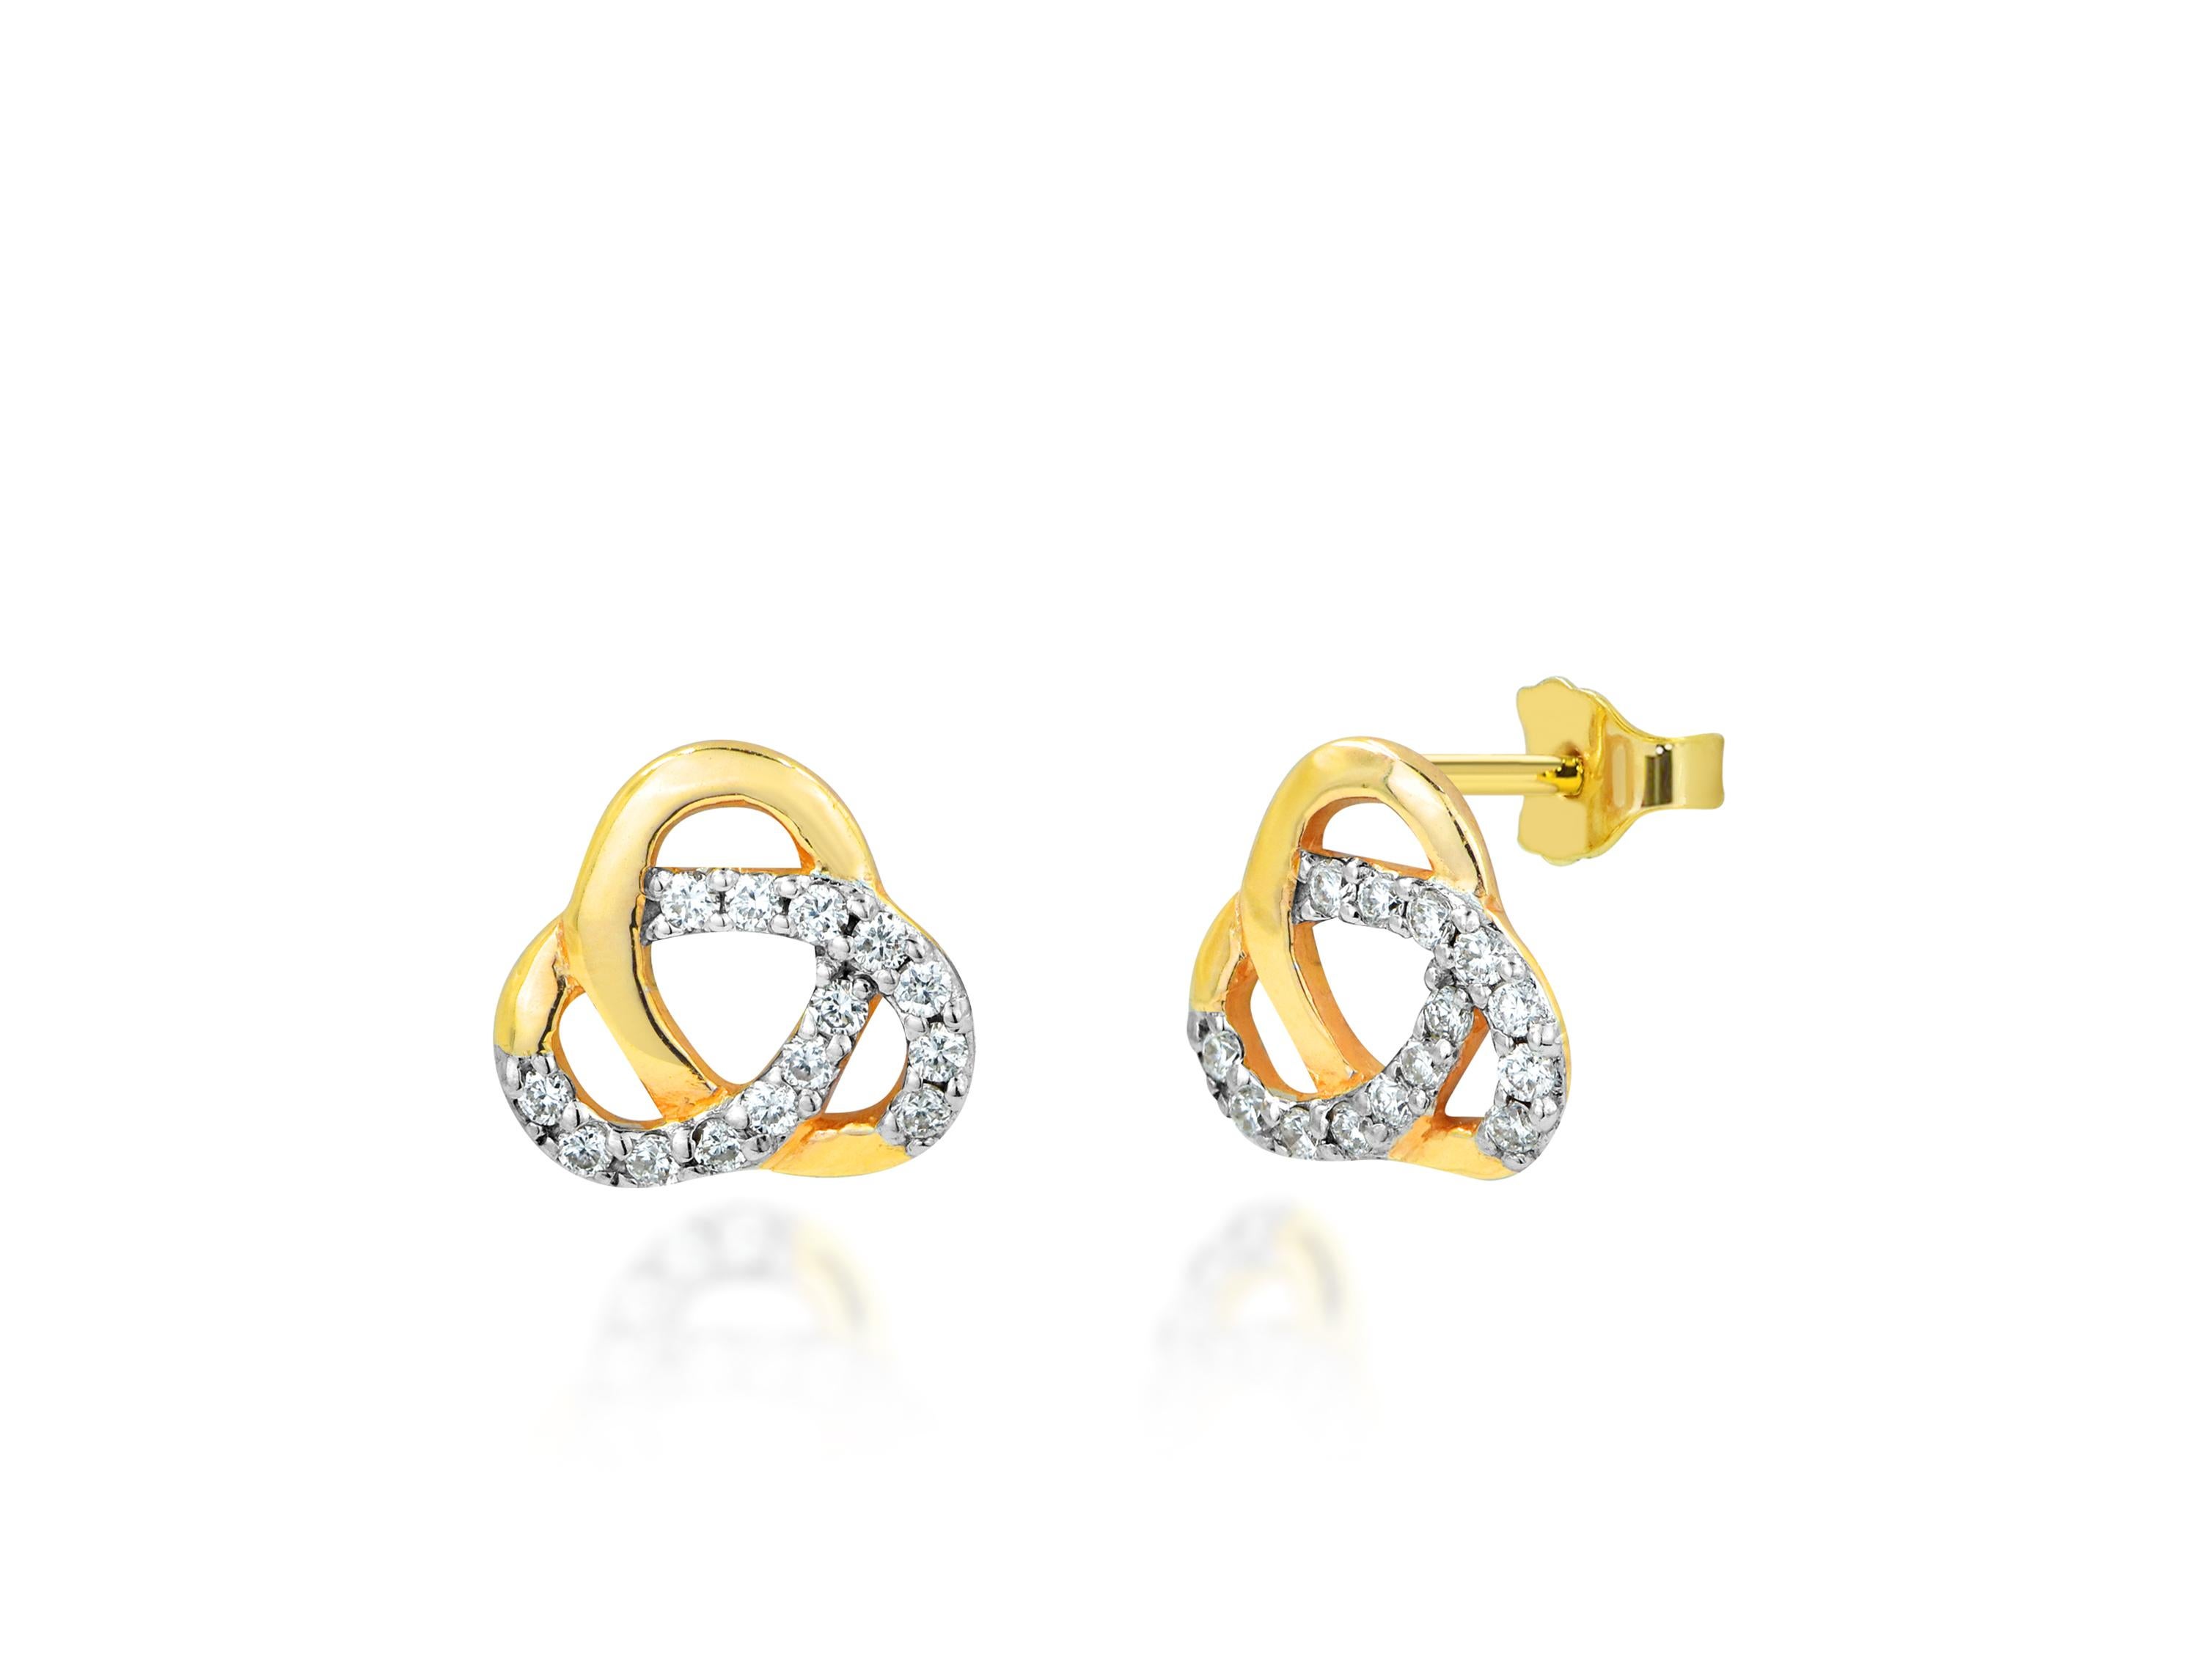 Diamond Love Knot Stud Earrings in 18k Rose Gold, Yellow Gold, White Gold.

These Dainty Stud Earrings are made of 18k solid gold featuring shiny brilliant round cut natural diamonds set by master setter in our studio. Simple but unique, elegant and